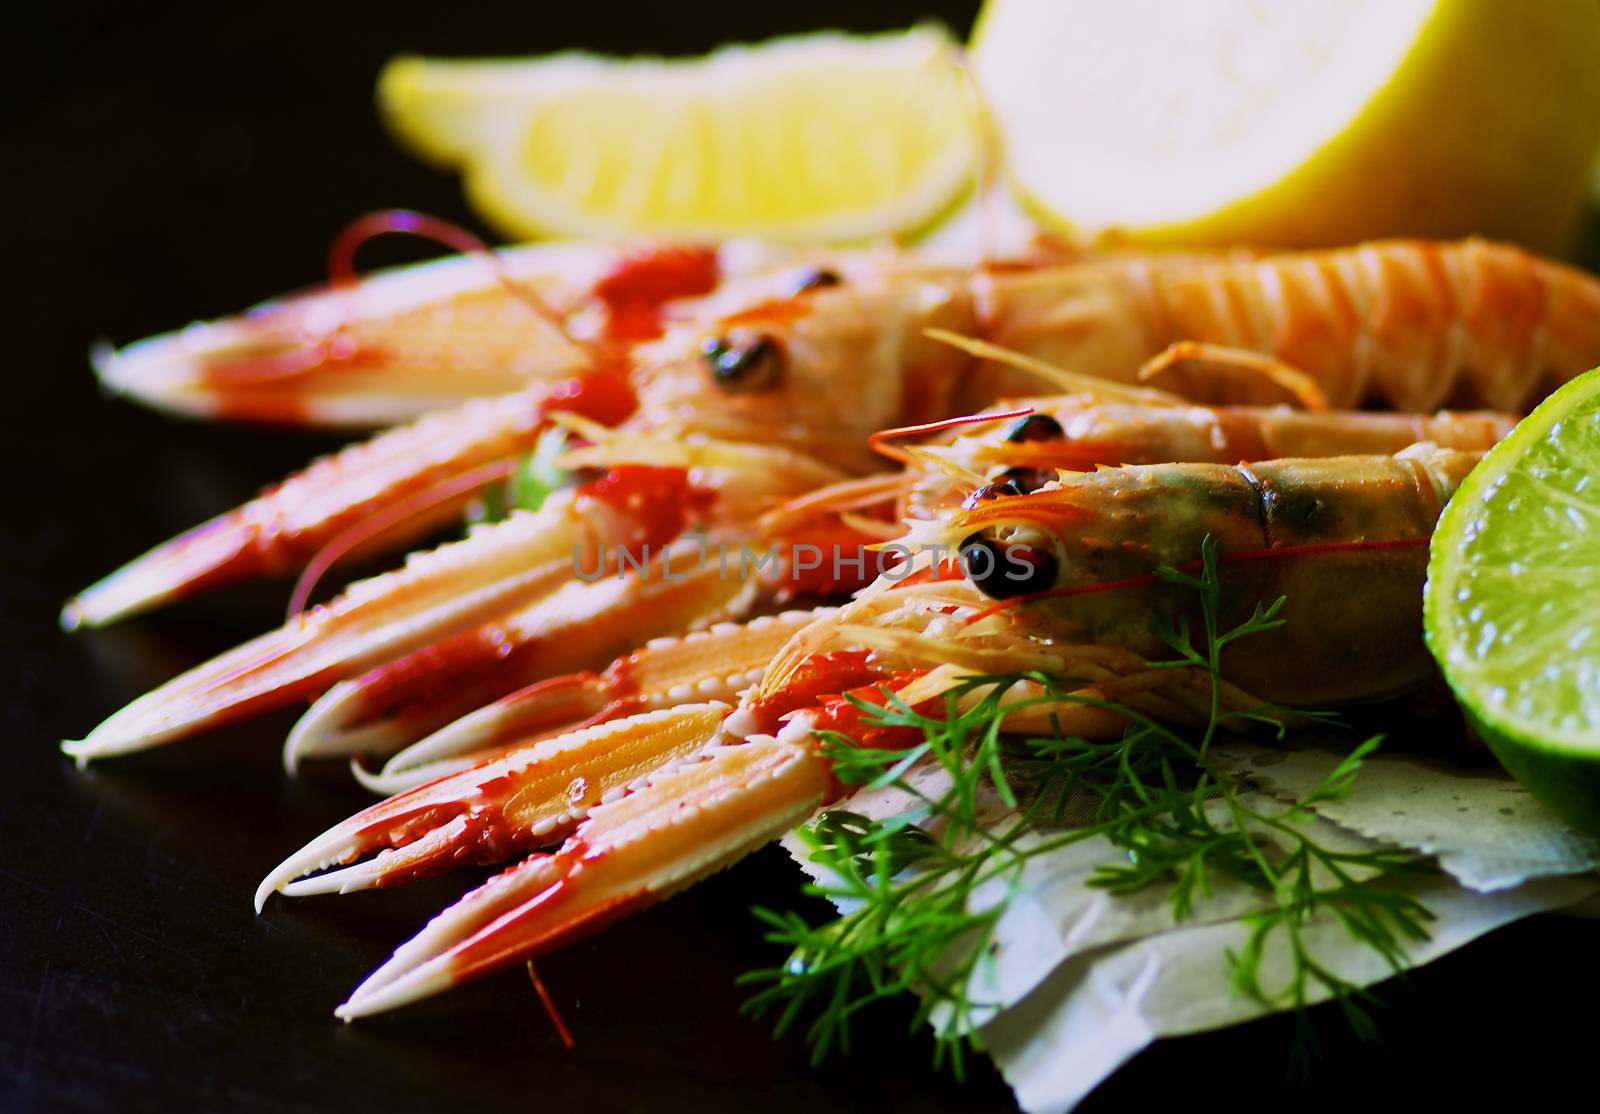 Delicious Grilled Langoustines  on Newspaper with Lime and Lemon closeup on Dark Wooden background. Focus on Animal Eyes on Foreground